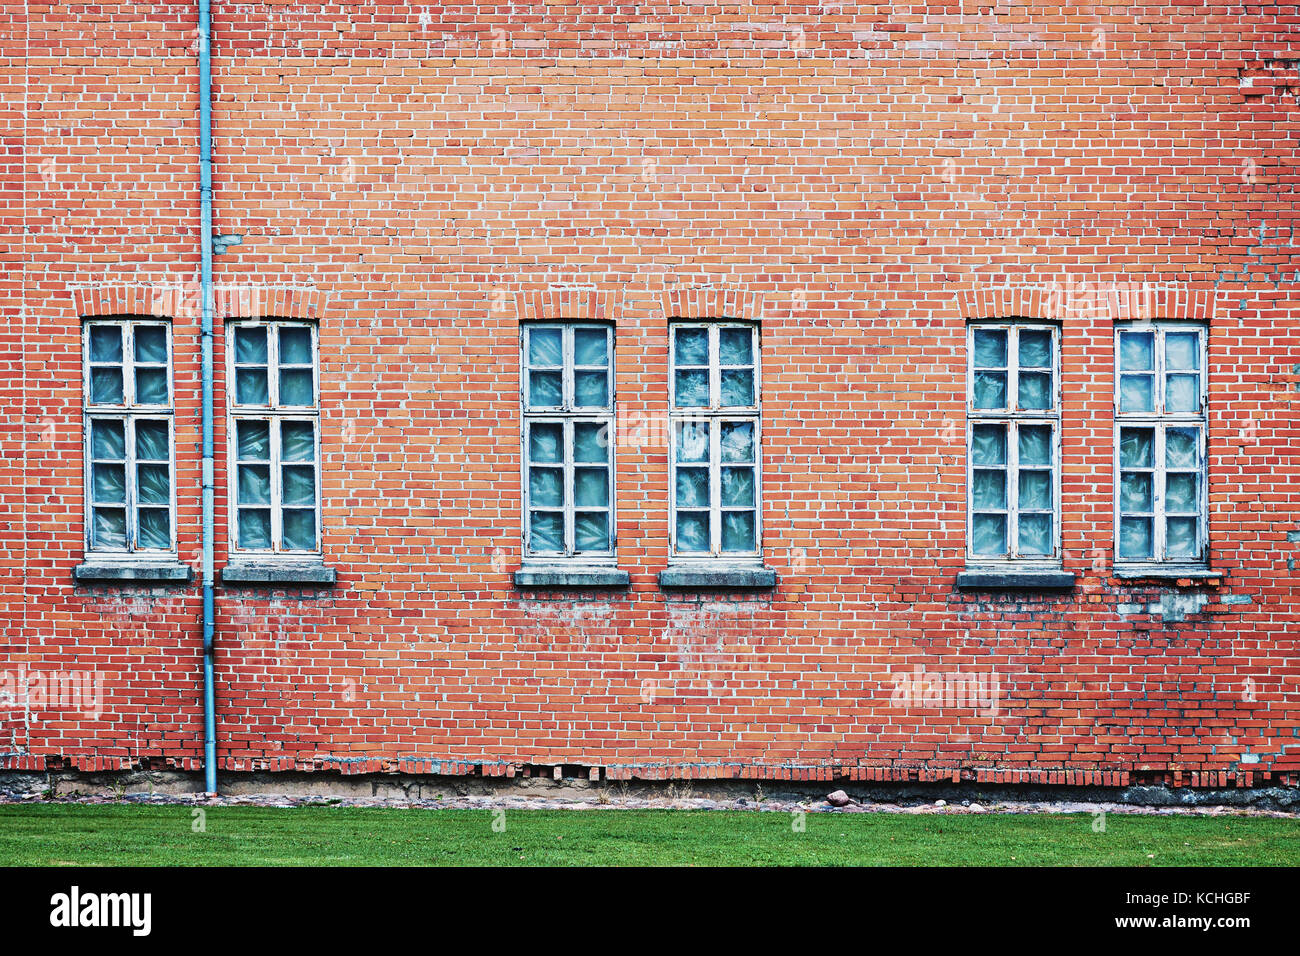 Abandoned architecture background with old weathered brick wall and group of windows Stock Photo